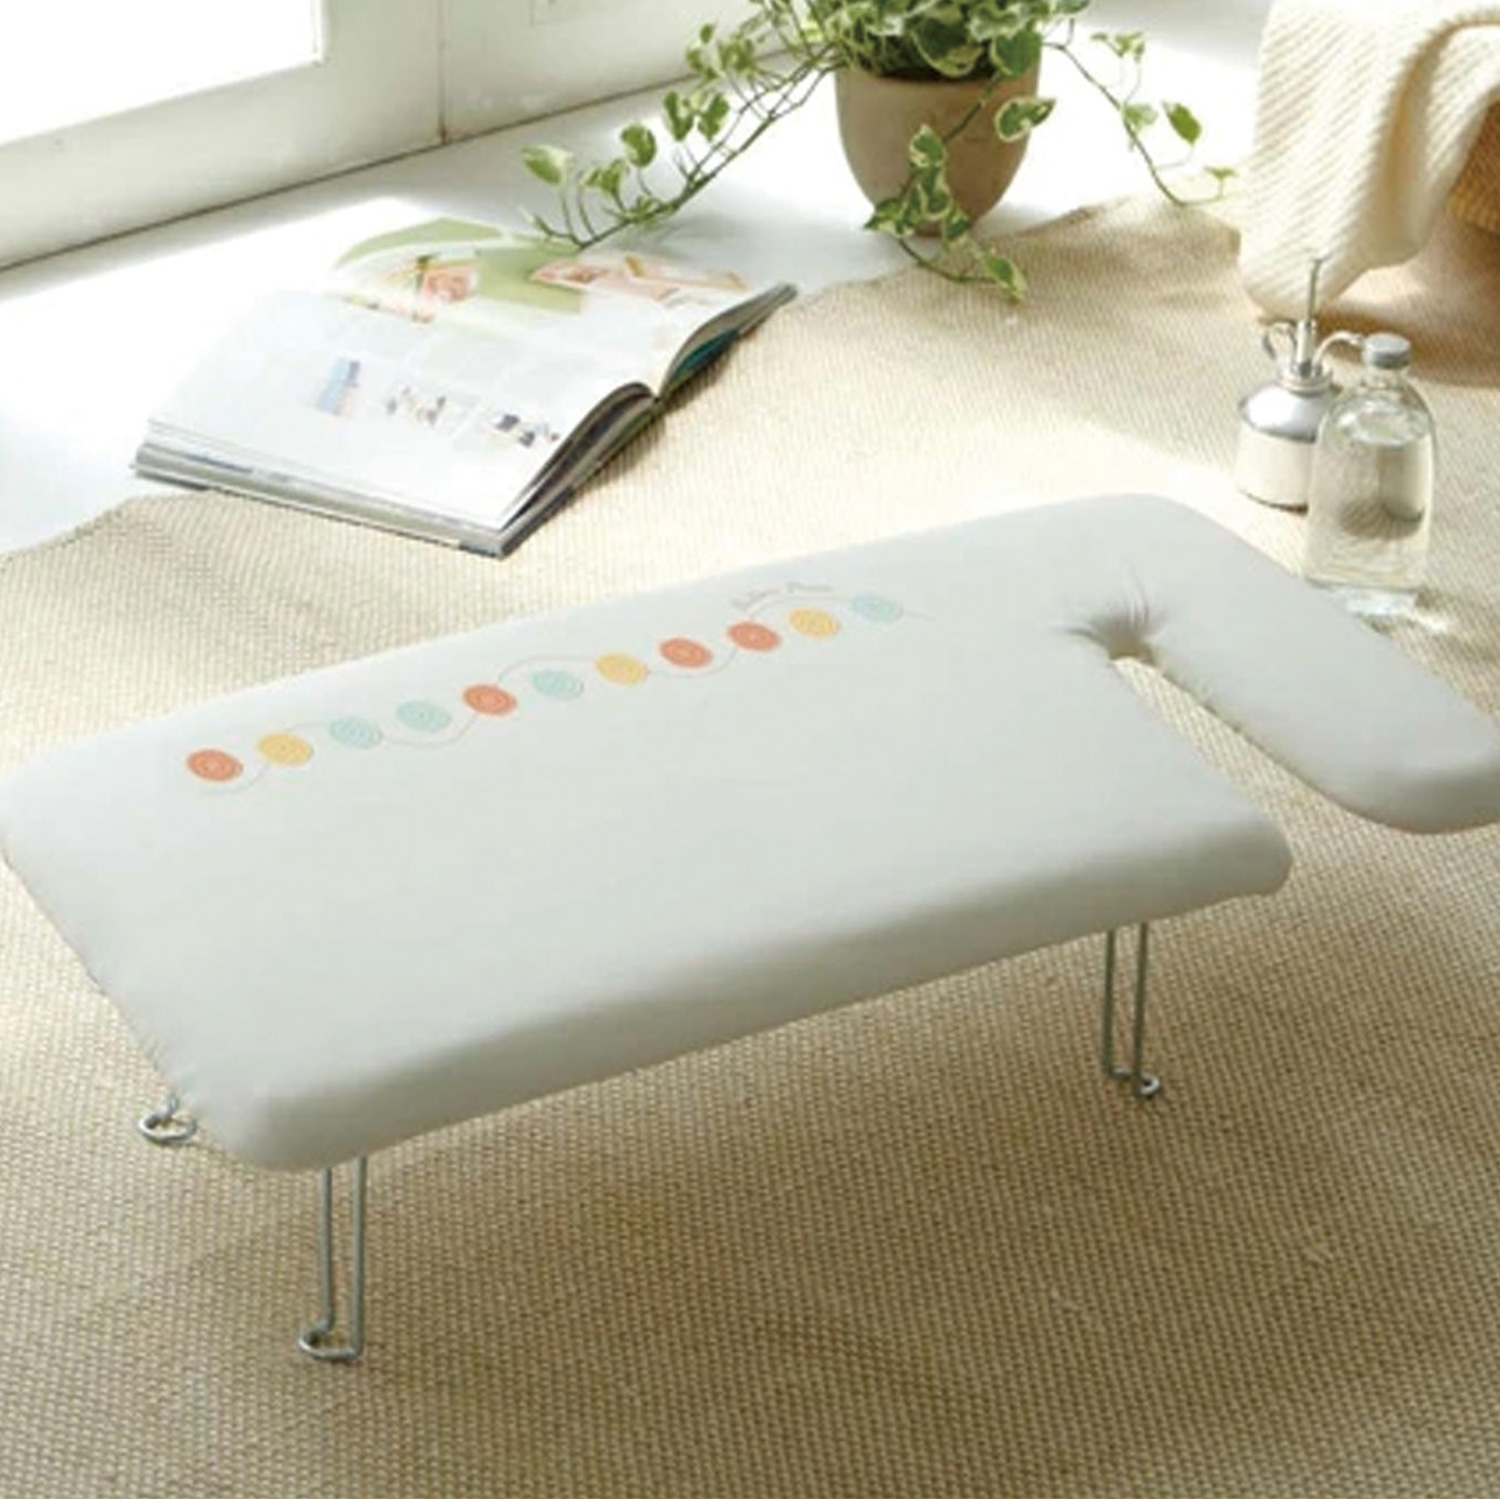 YJ7807 Ironing Board Lightweight Pair Press with Hook (pcs)